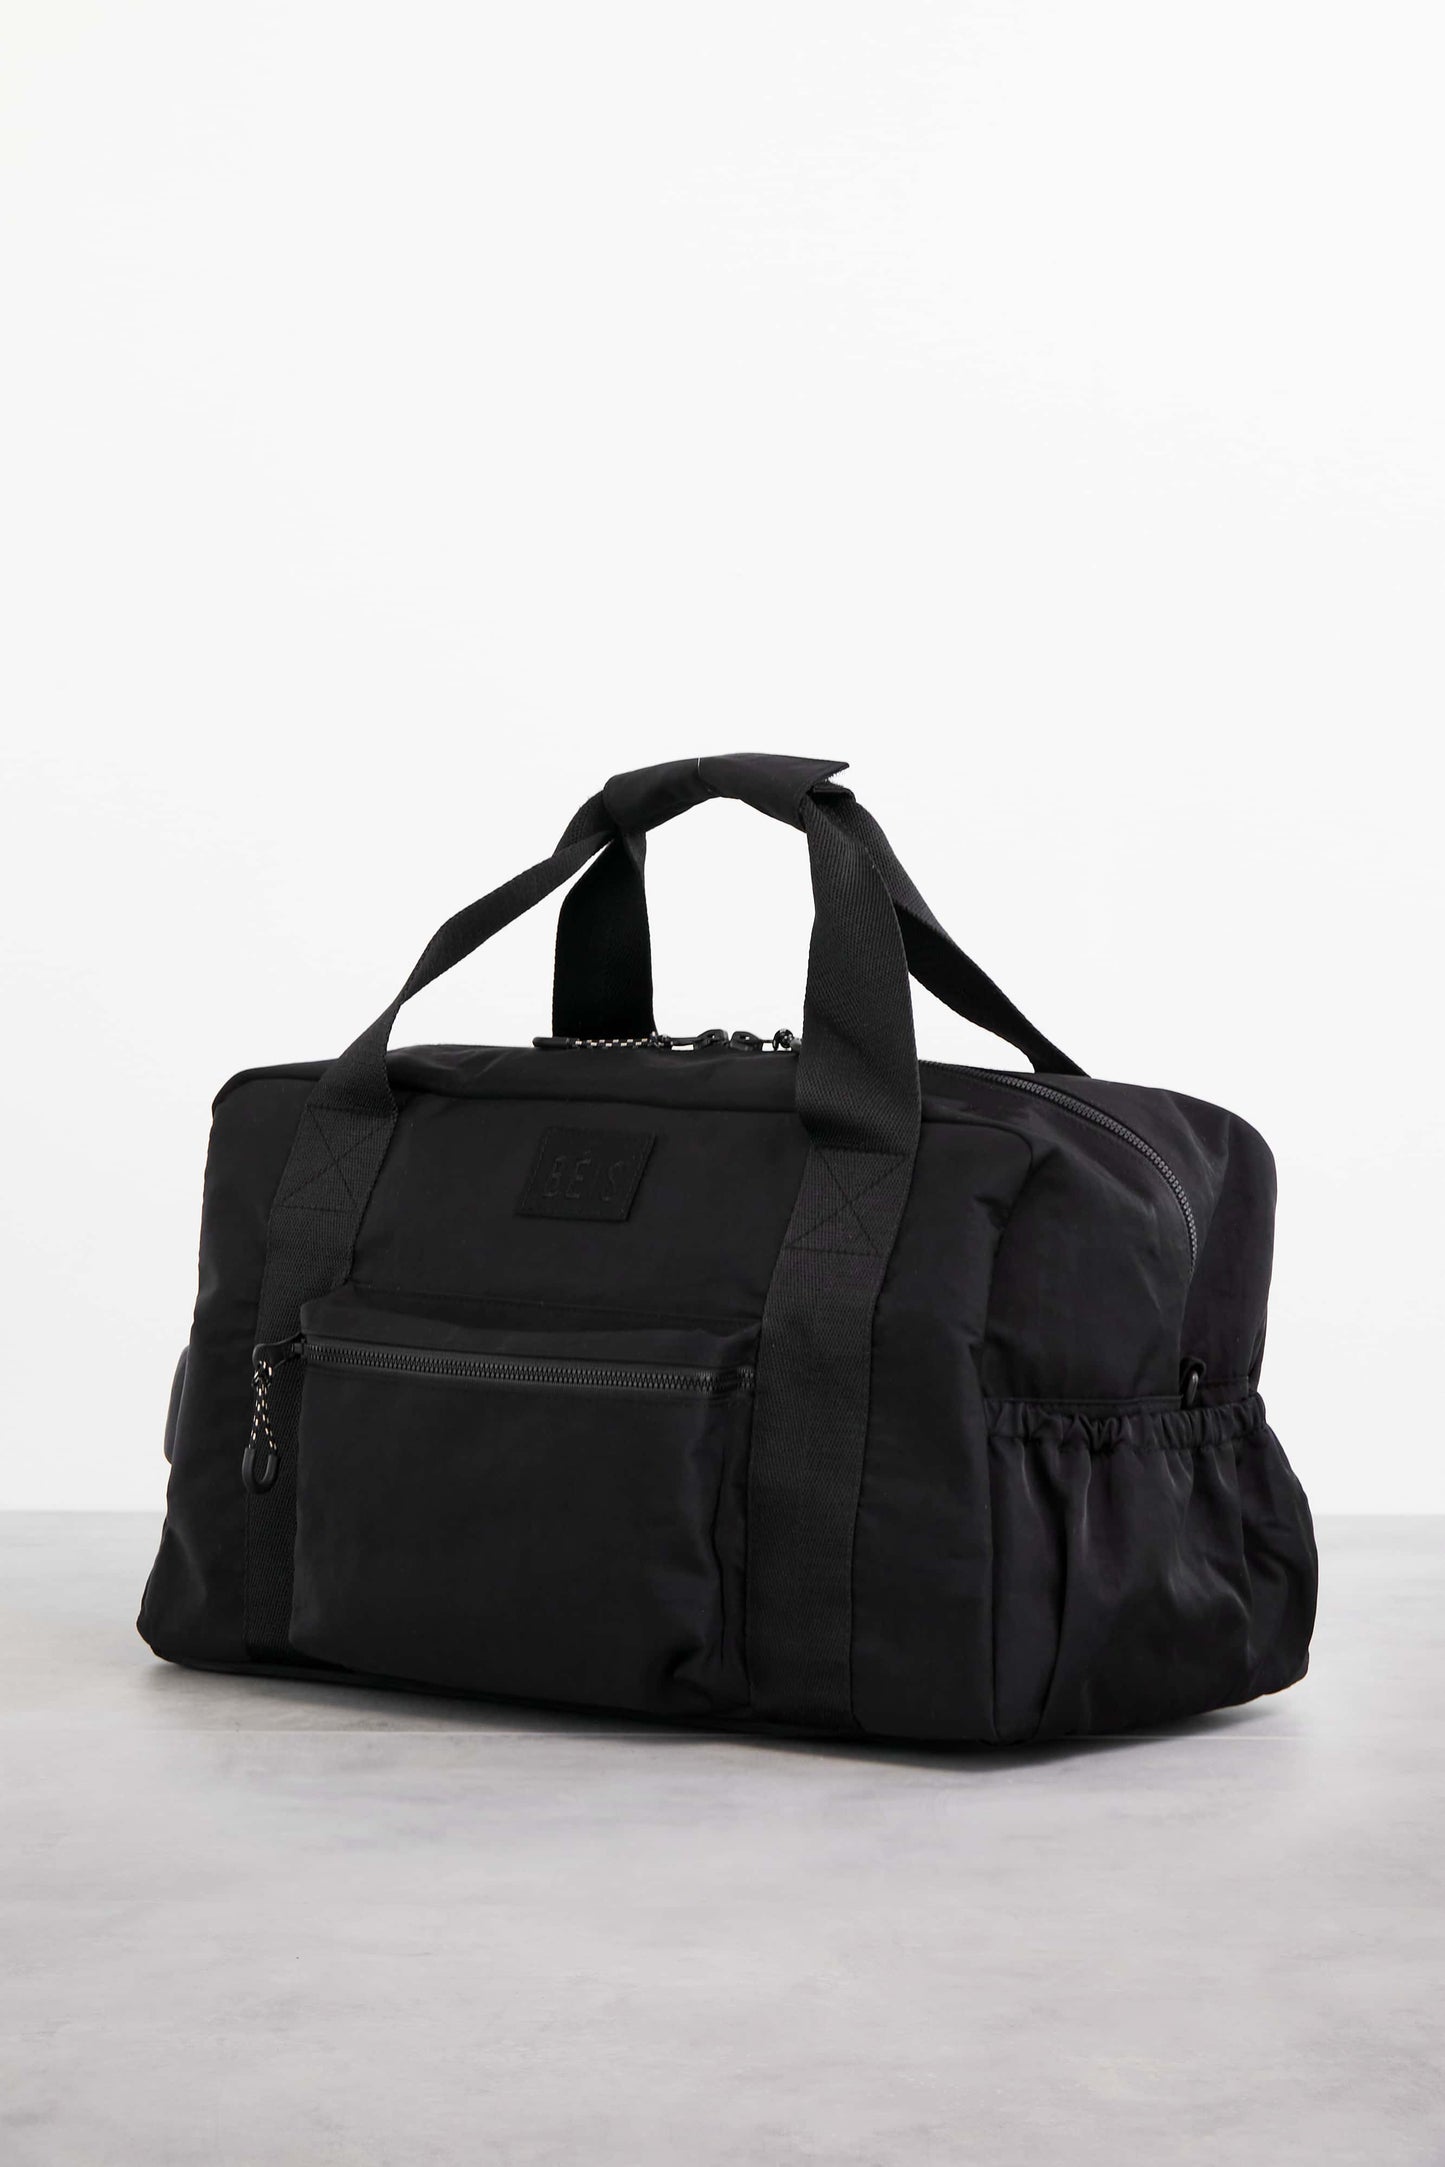 Sport Duffle Black Front and Side View